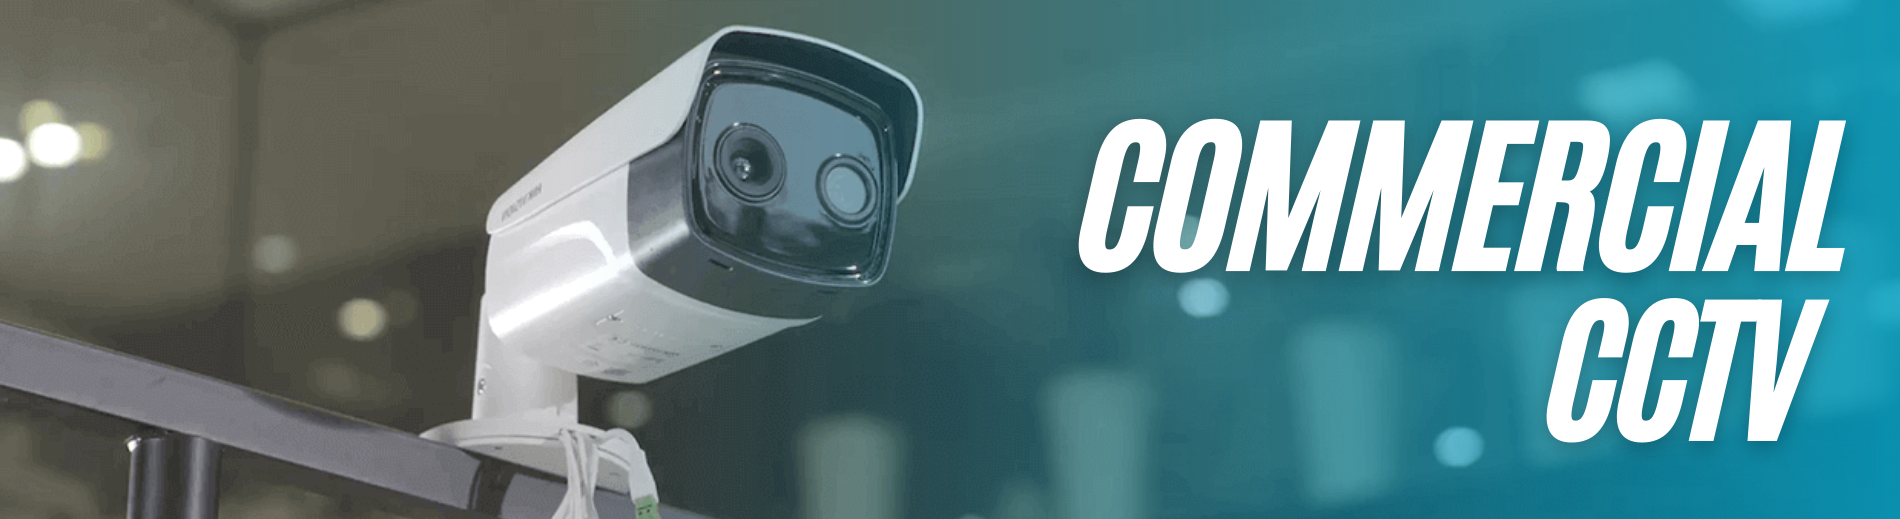 COMMERCIAL CCTV